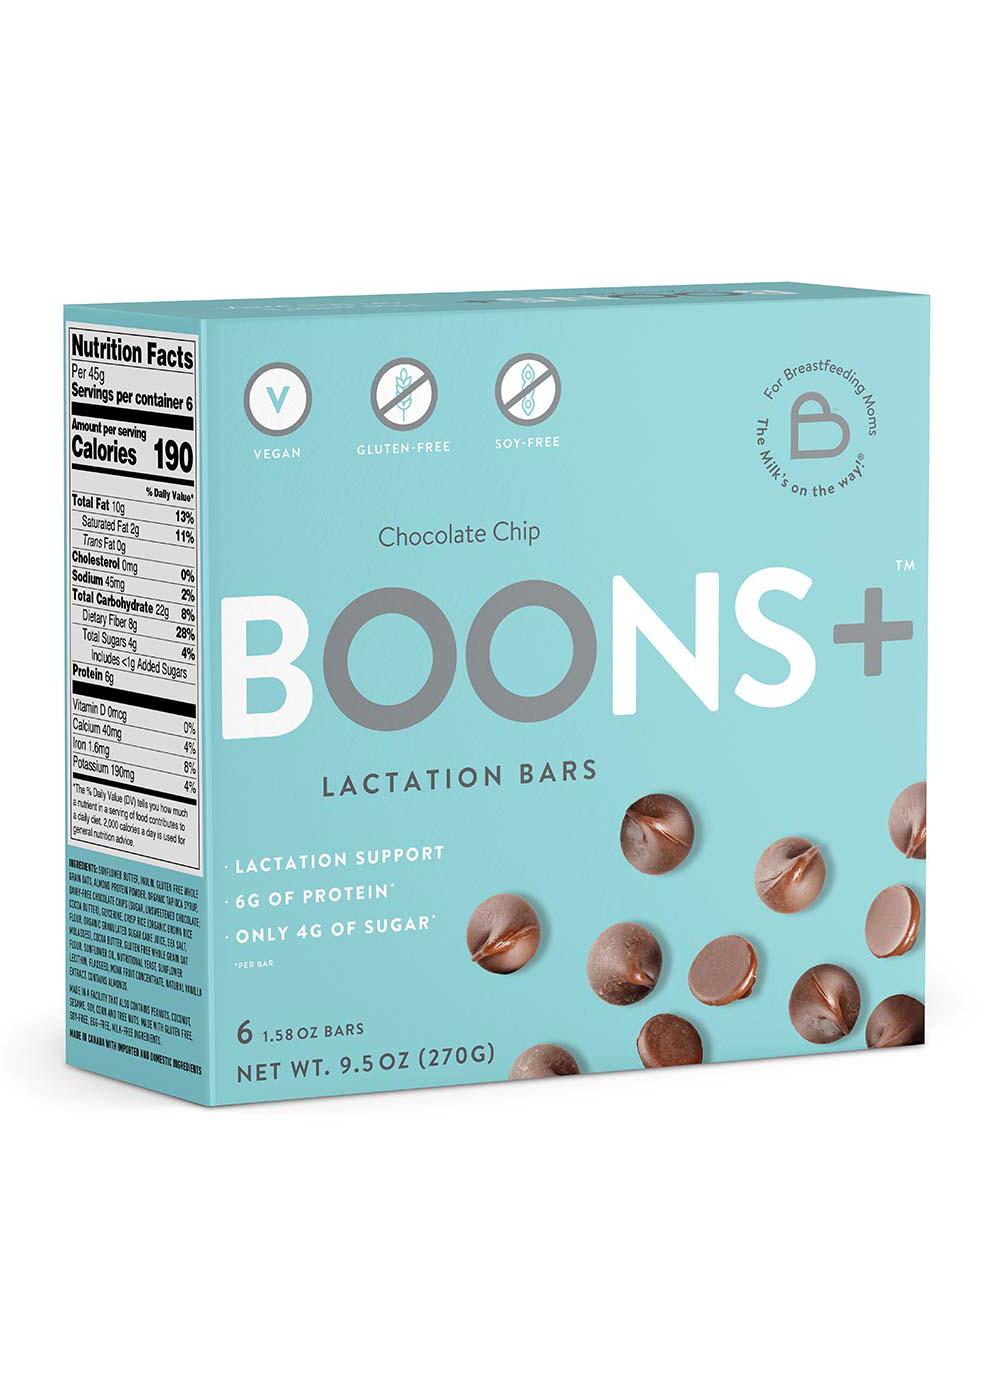 Boons + Lactation Bars Chocolate Chip; image 1 of 3